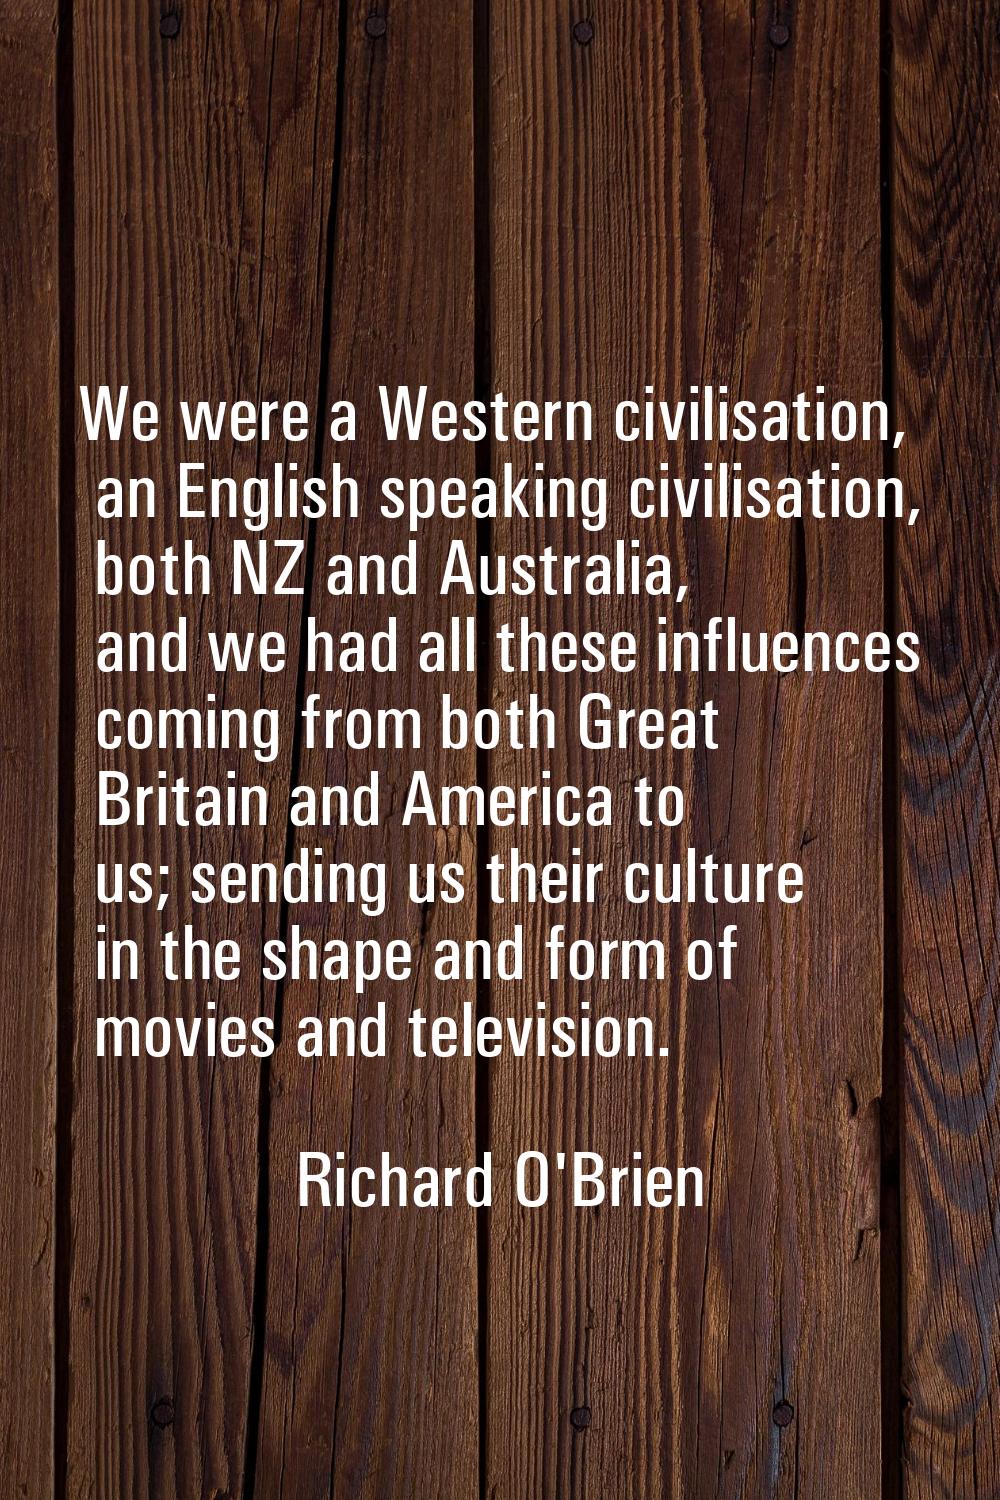 We were a Western civilisation, an English speaking civilisation, both NZ and Australia, and we had